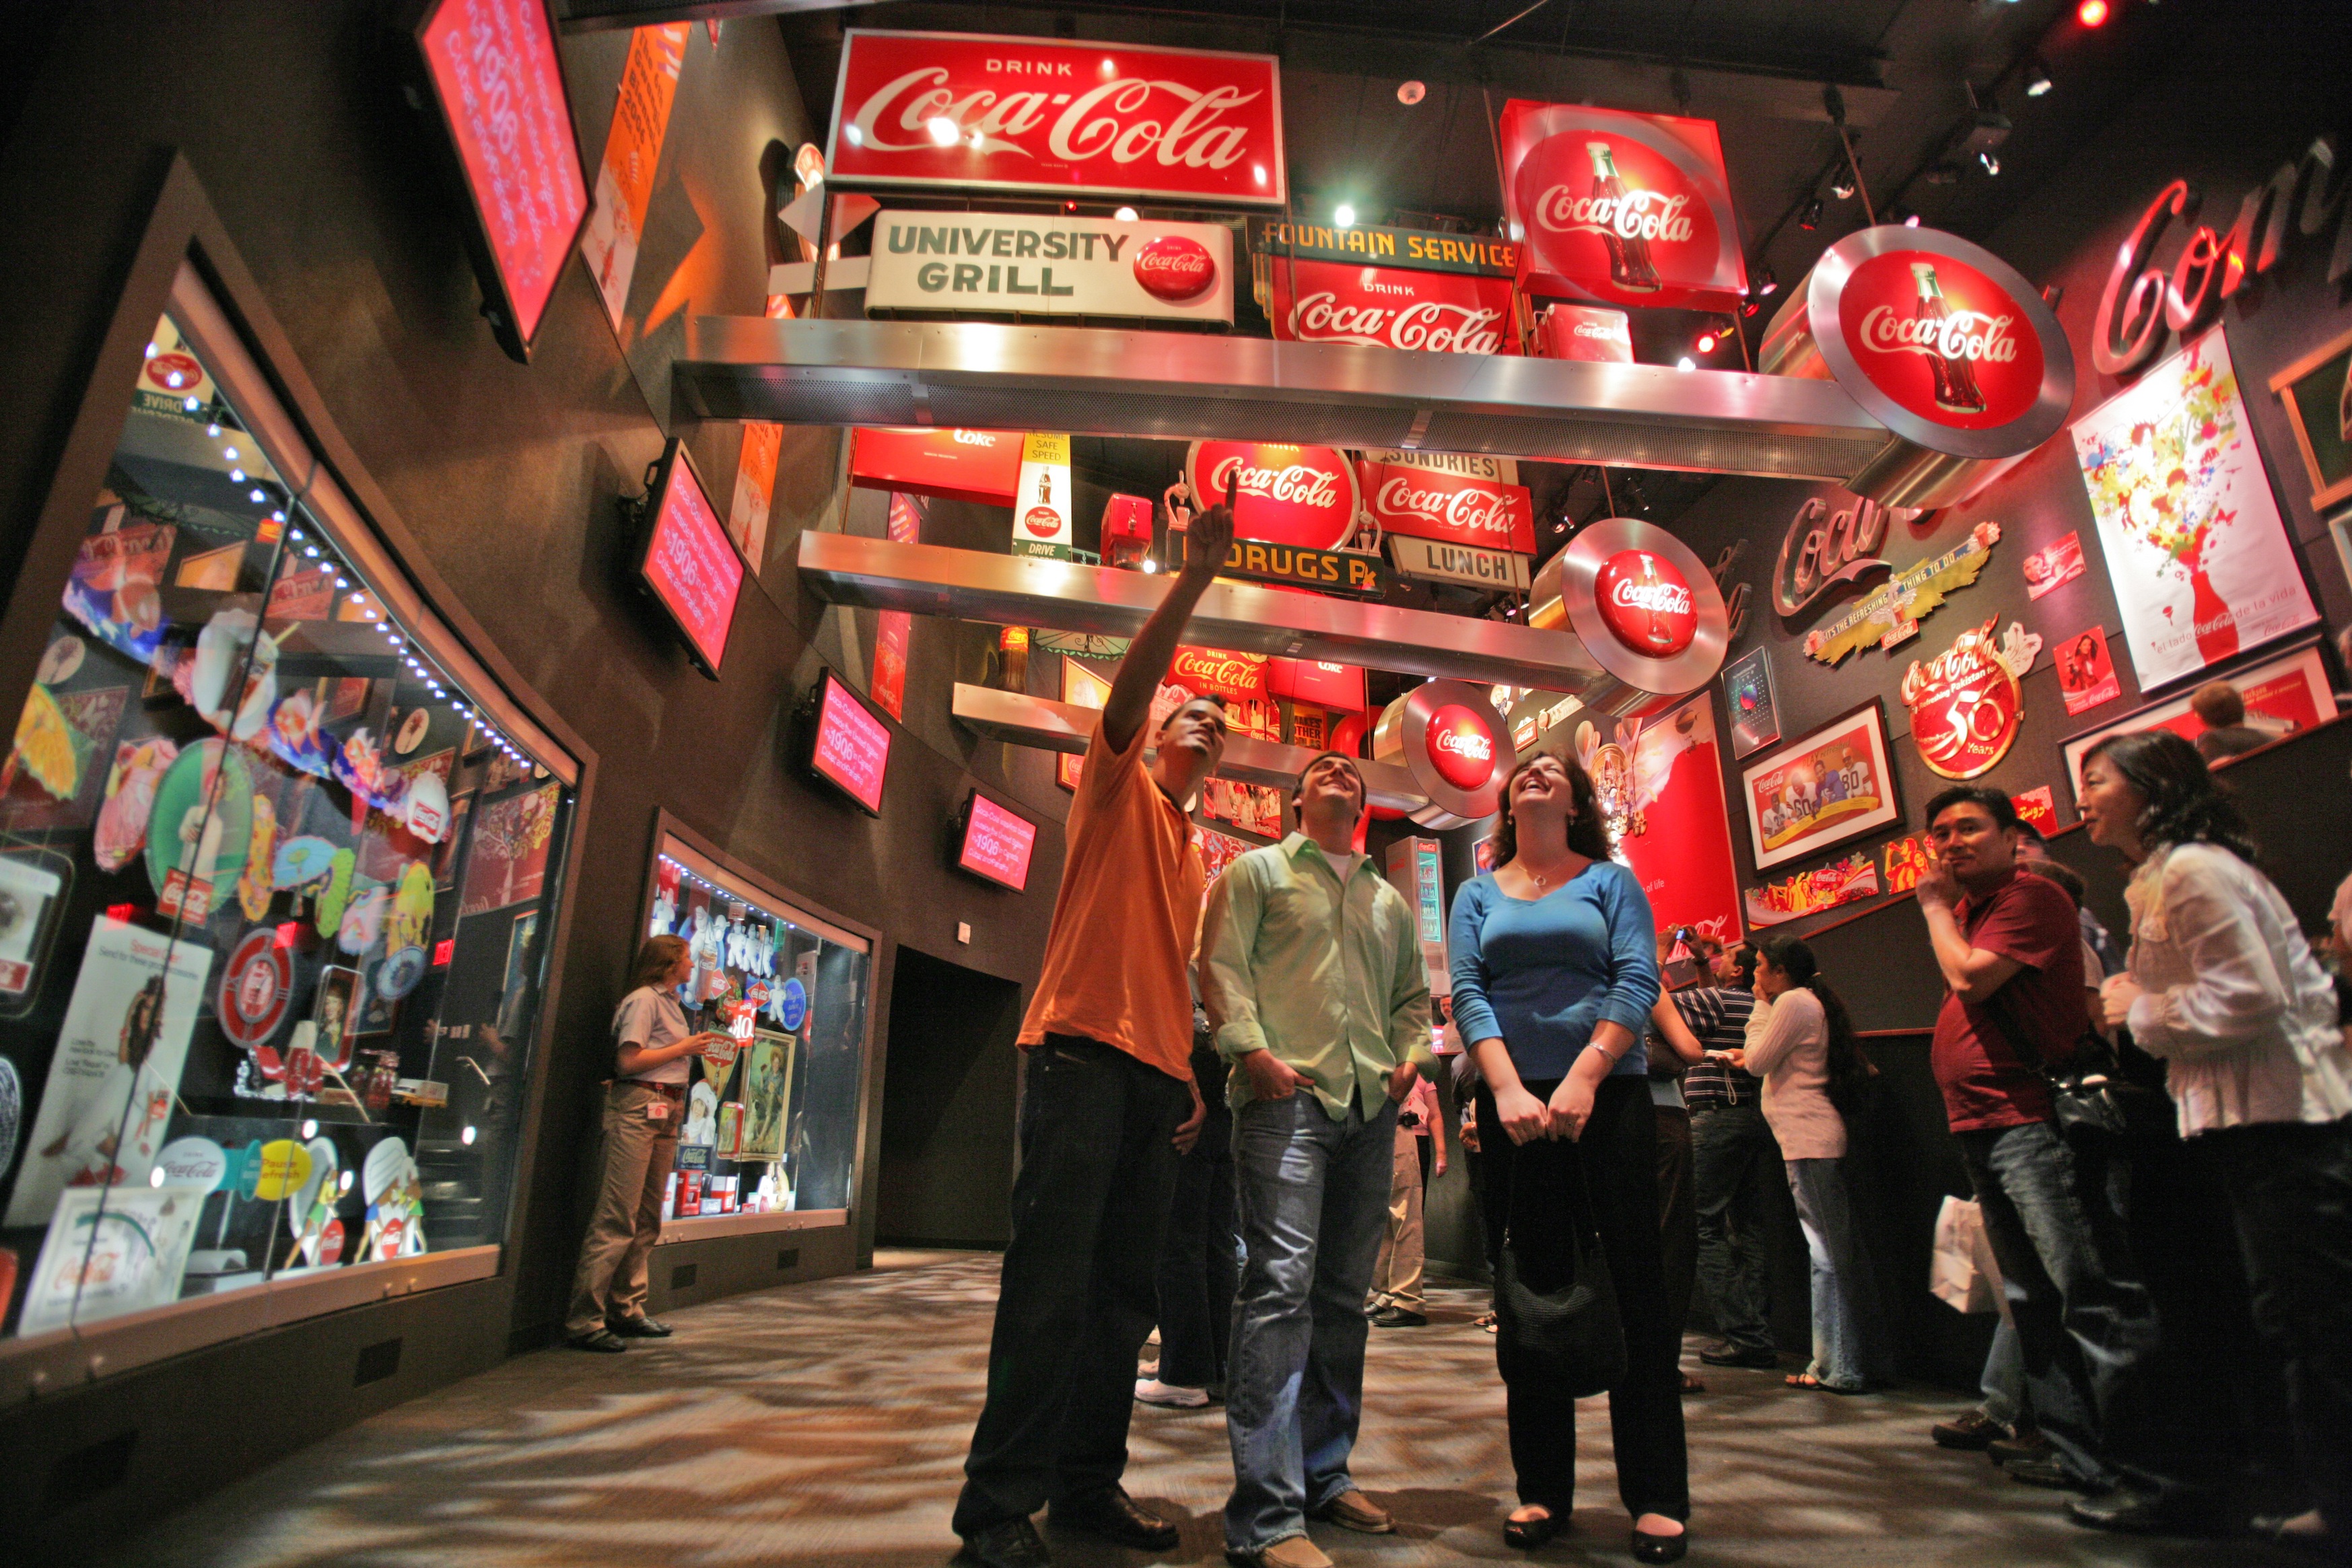 Walk through Centennial Olympic Park and then quench your thirst at the World of Coca-Cola.